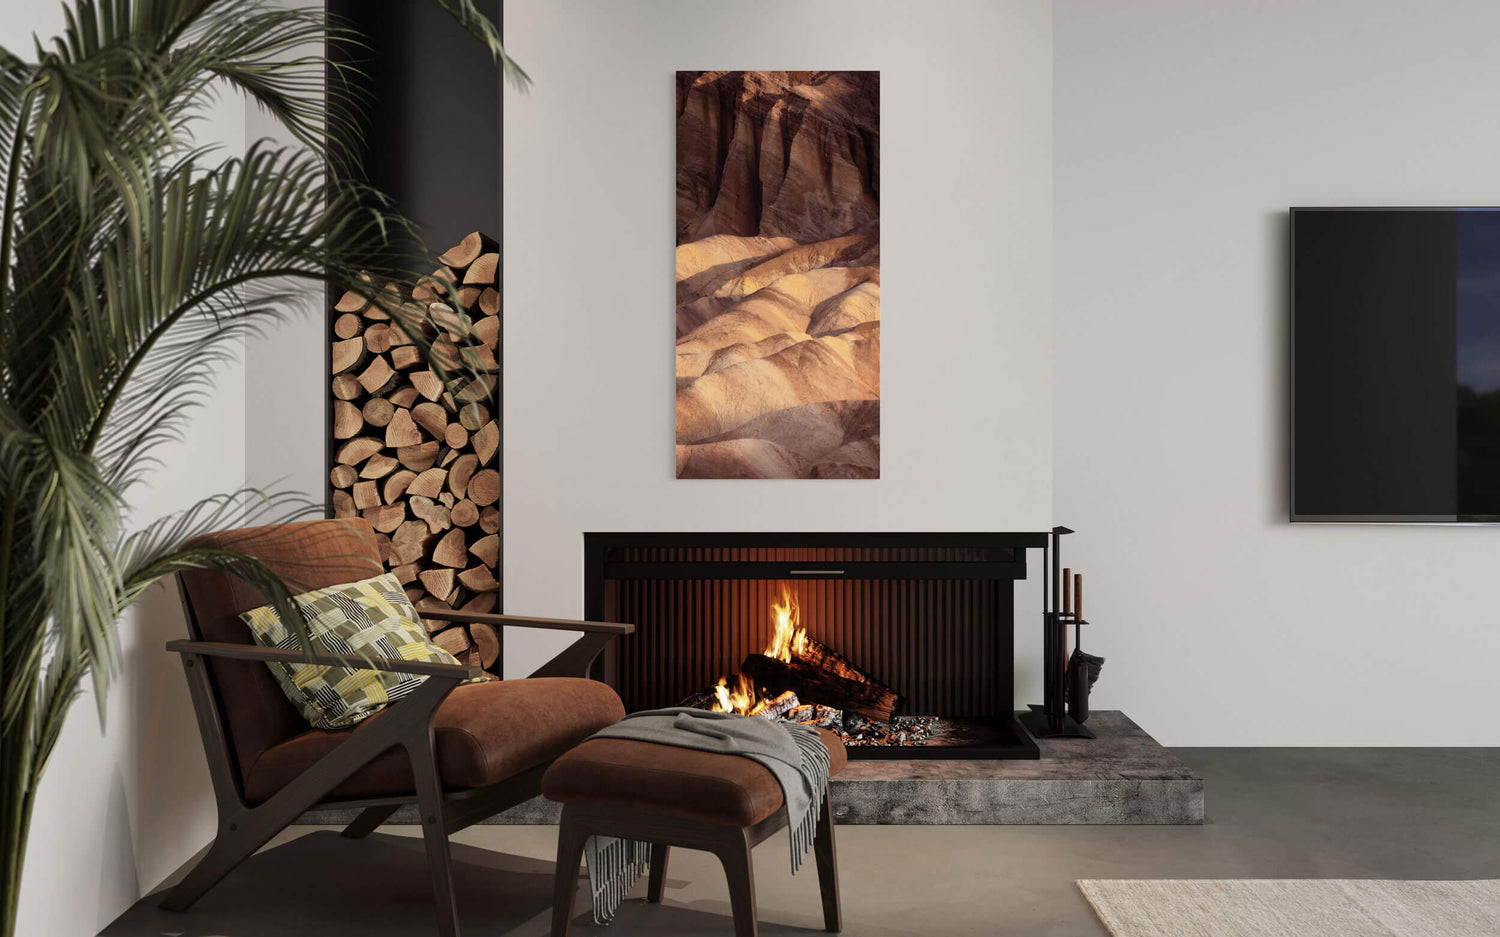 A Zabriskie Point picture from Death Valley National Park hangs in a living room.